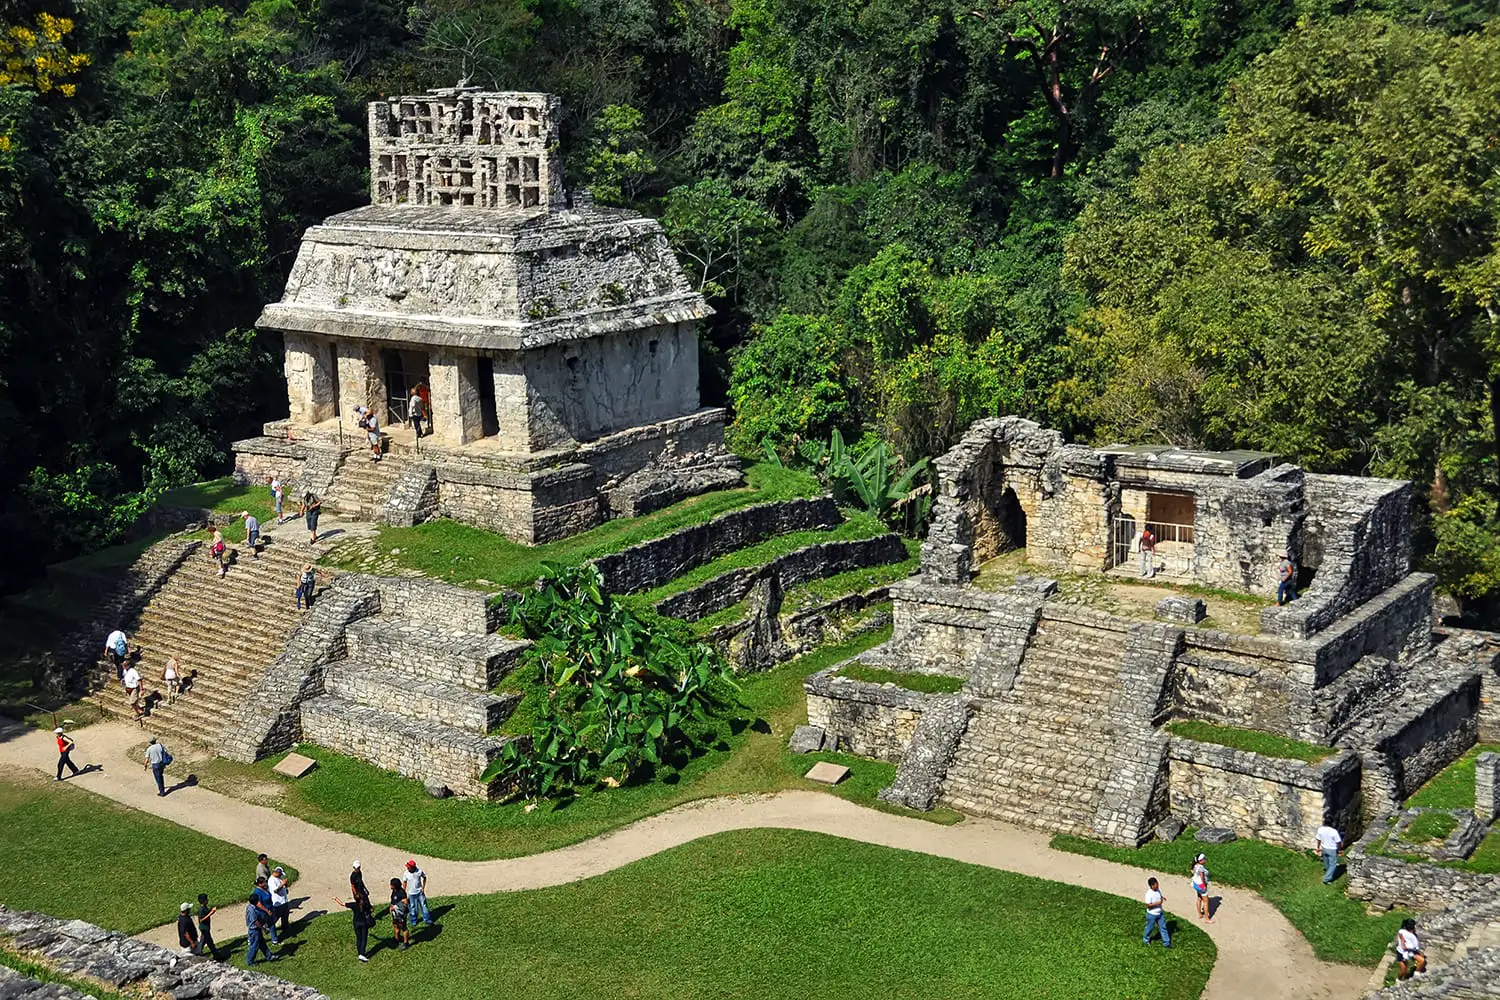 Mayan ruins in Palenque, Chiapas, Mexico. It is one of the best preserved sites, which contains interesting architecture and is popular tourist attraction